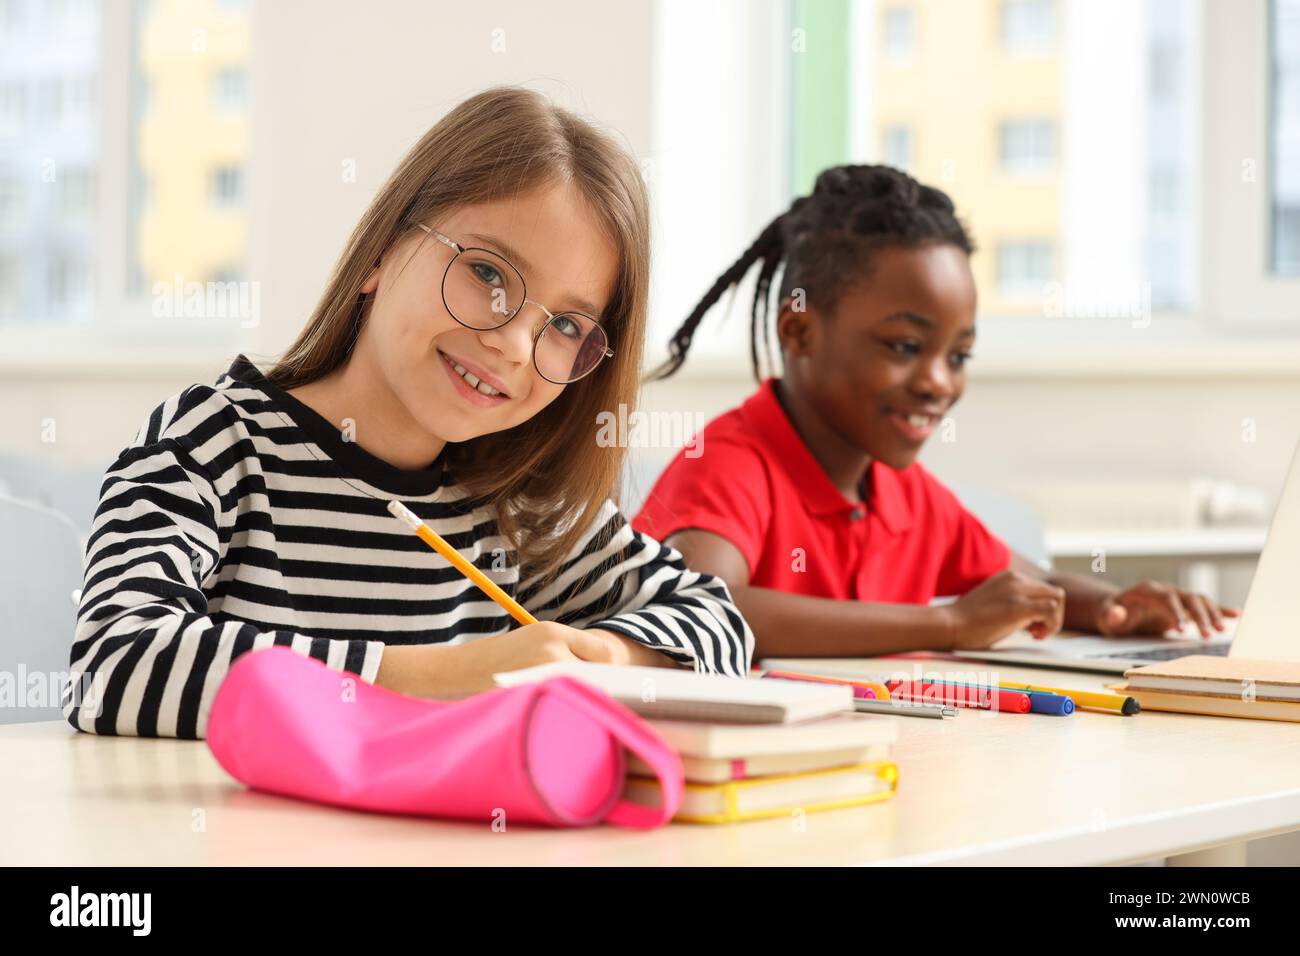 Smiling girl with her classmate studying in classroom at school Stock Photo